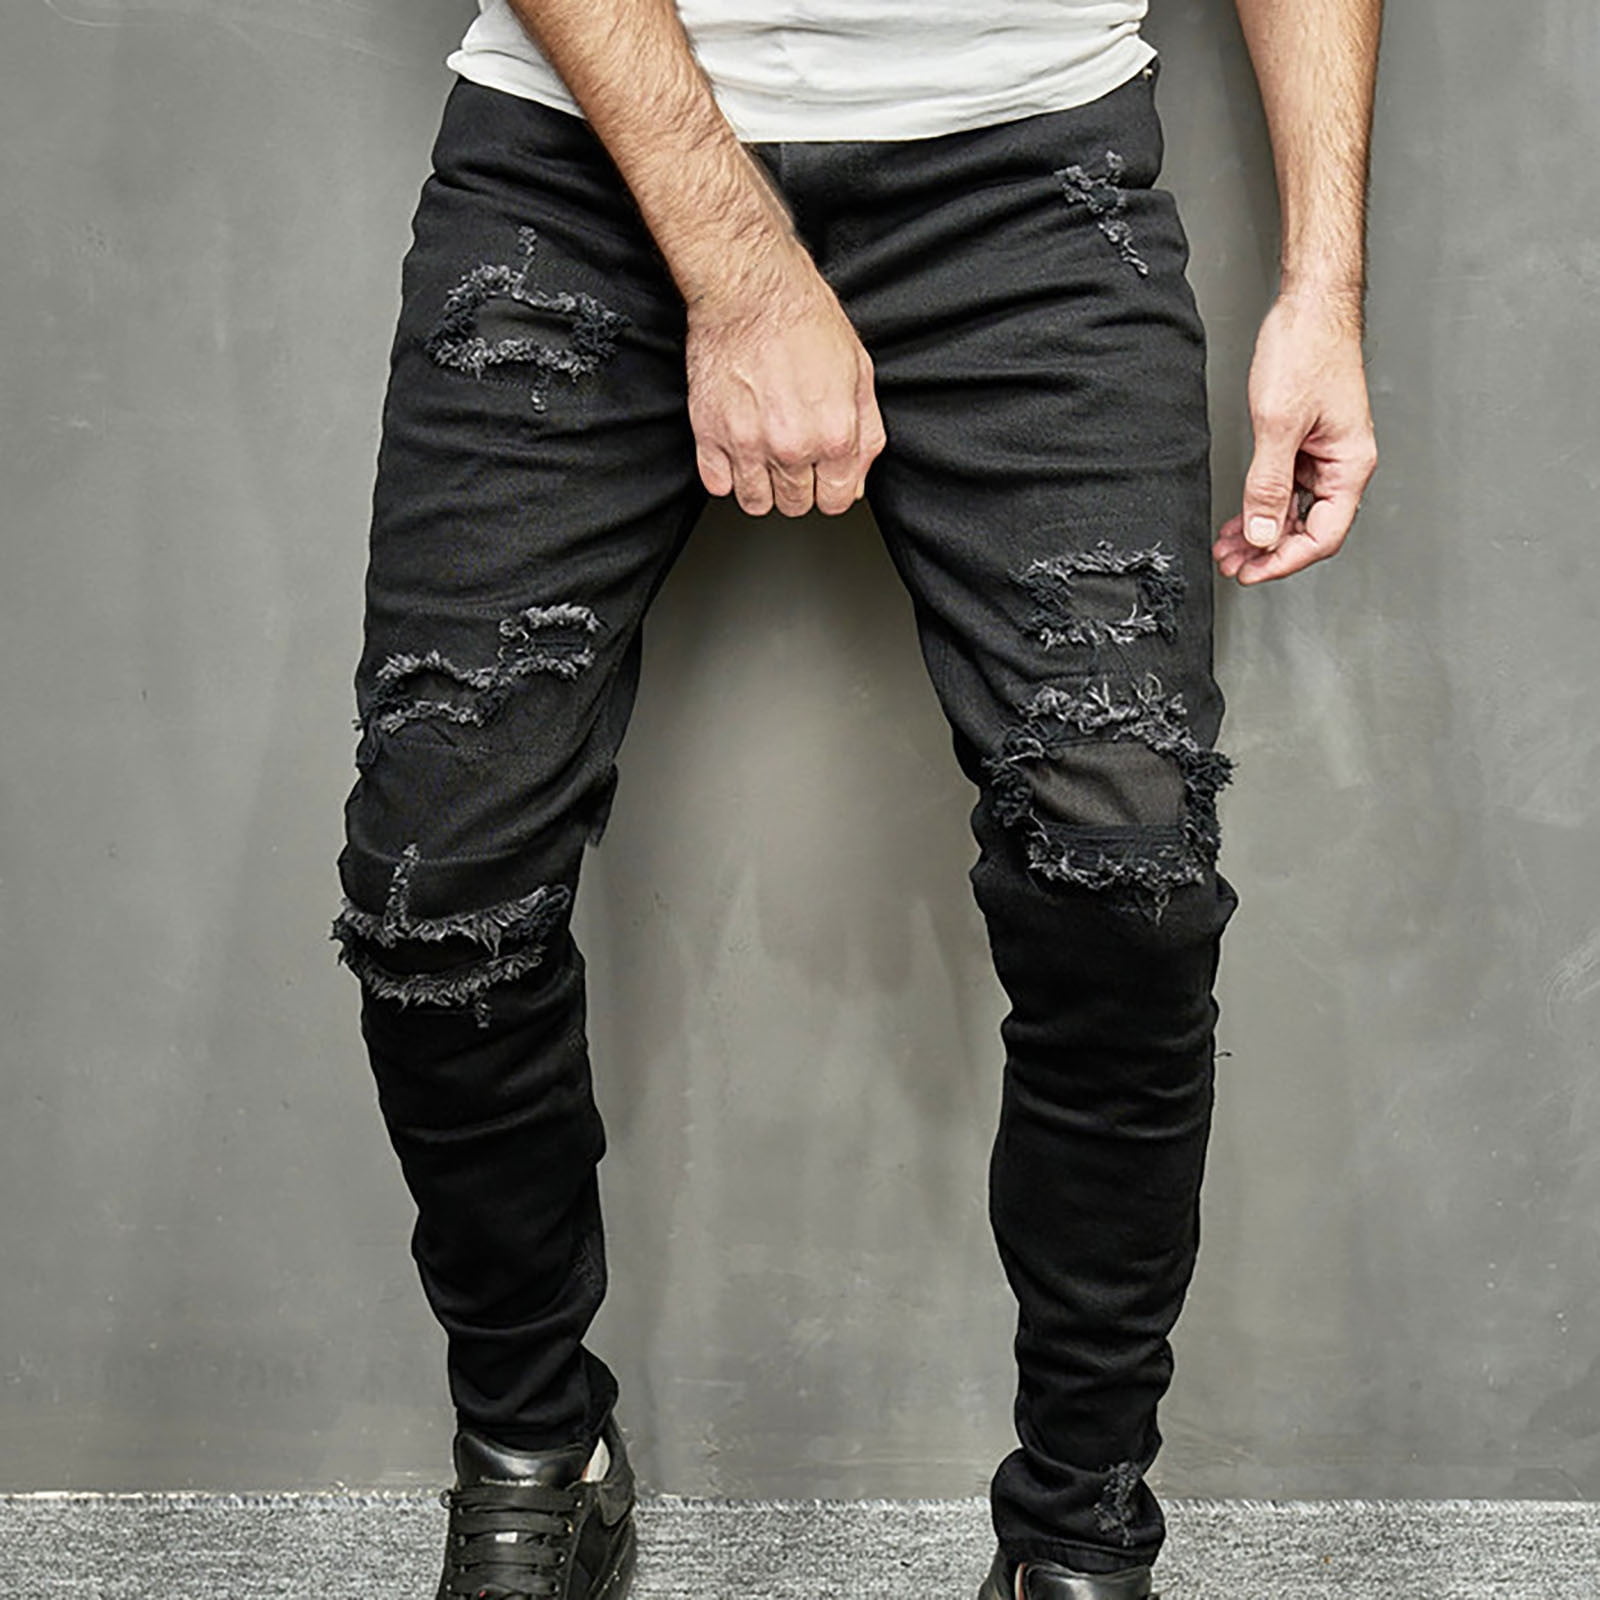 Plaid Wounds Skinny Ripped Jeans + Chain - Washed Black Y10 - FASH STOP